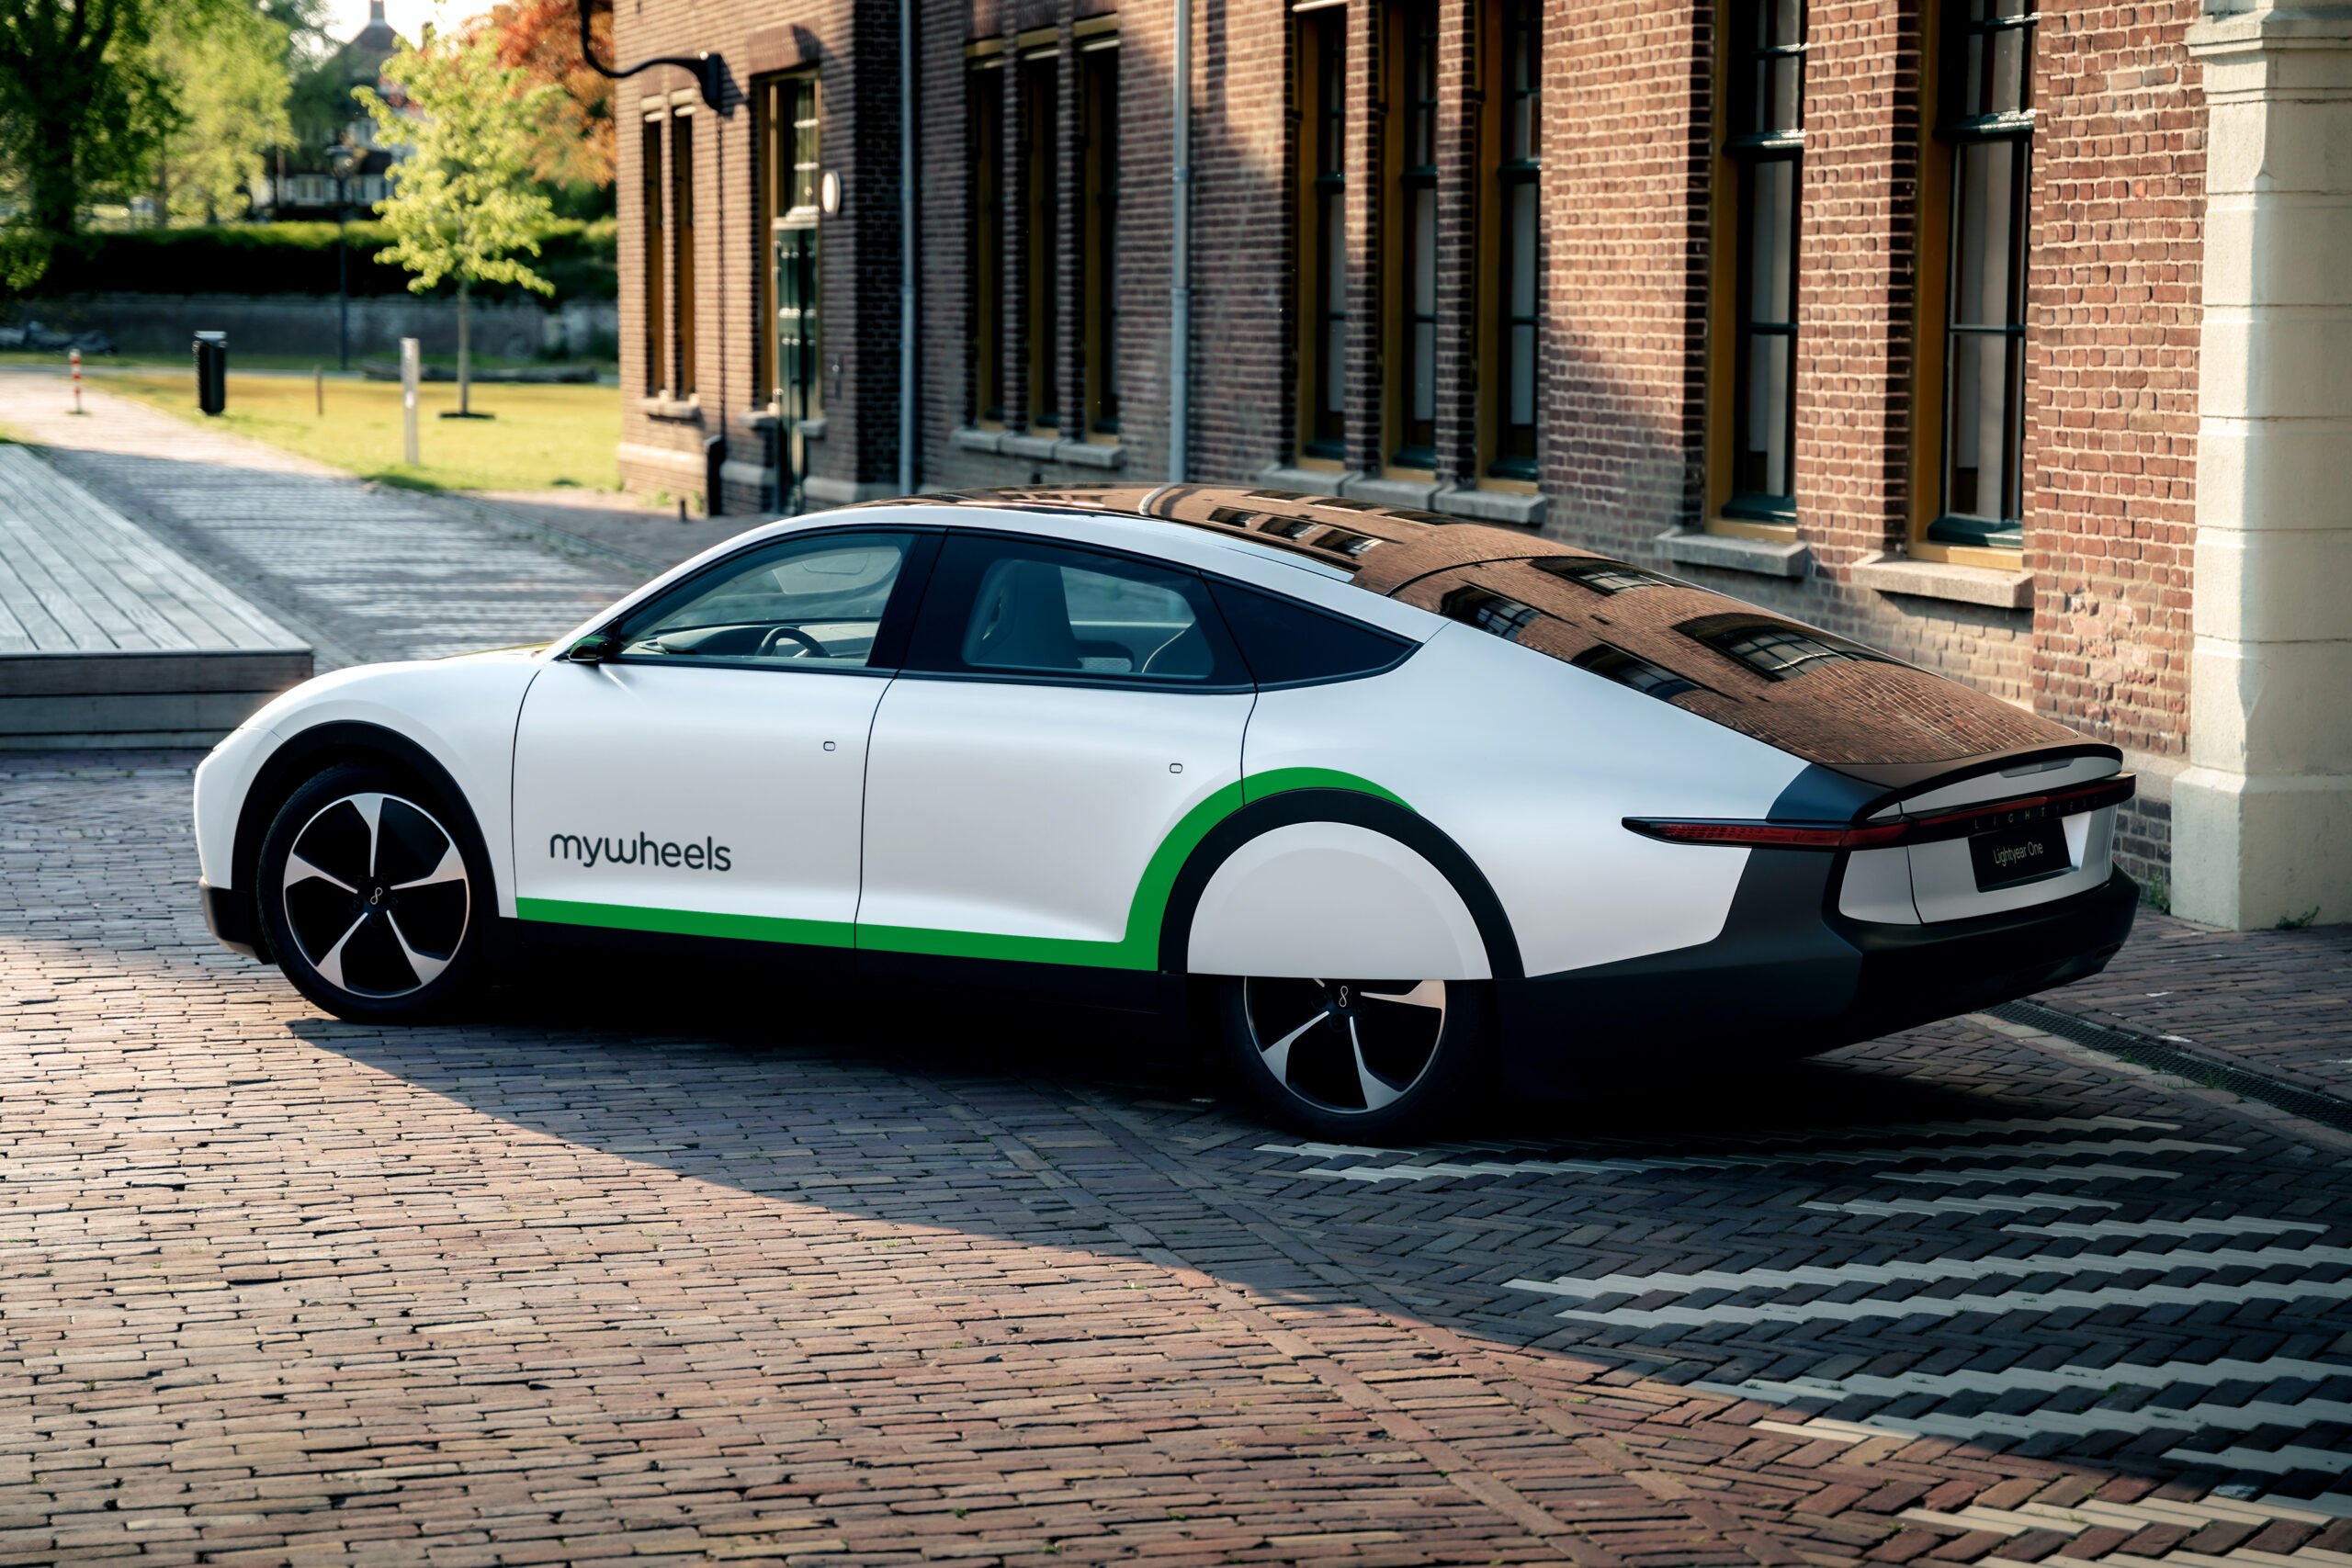 Hyper-efficient cars alleviate the electricity grid - 'Time for an energy label for e-cars'